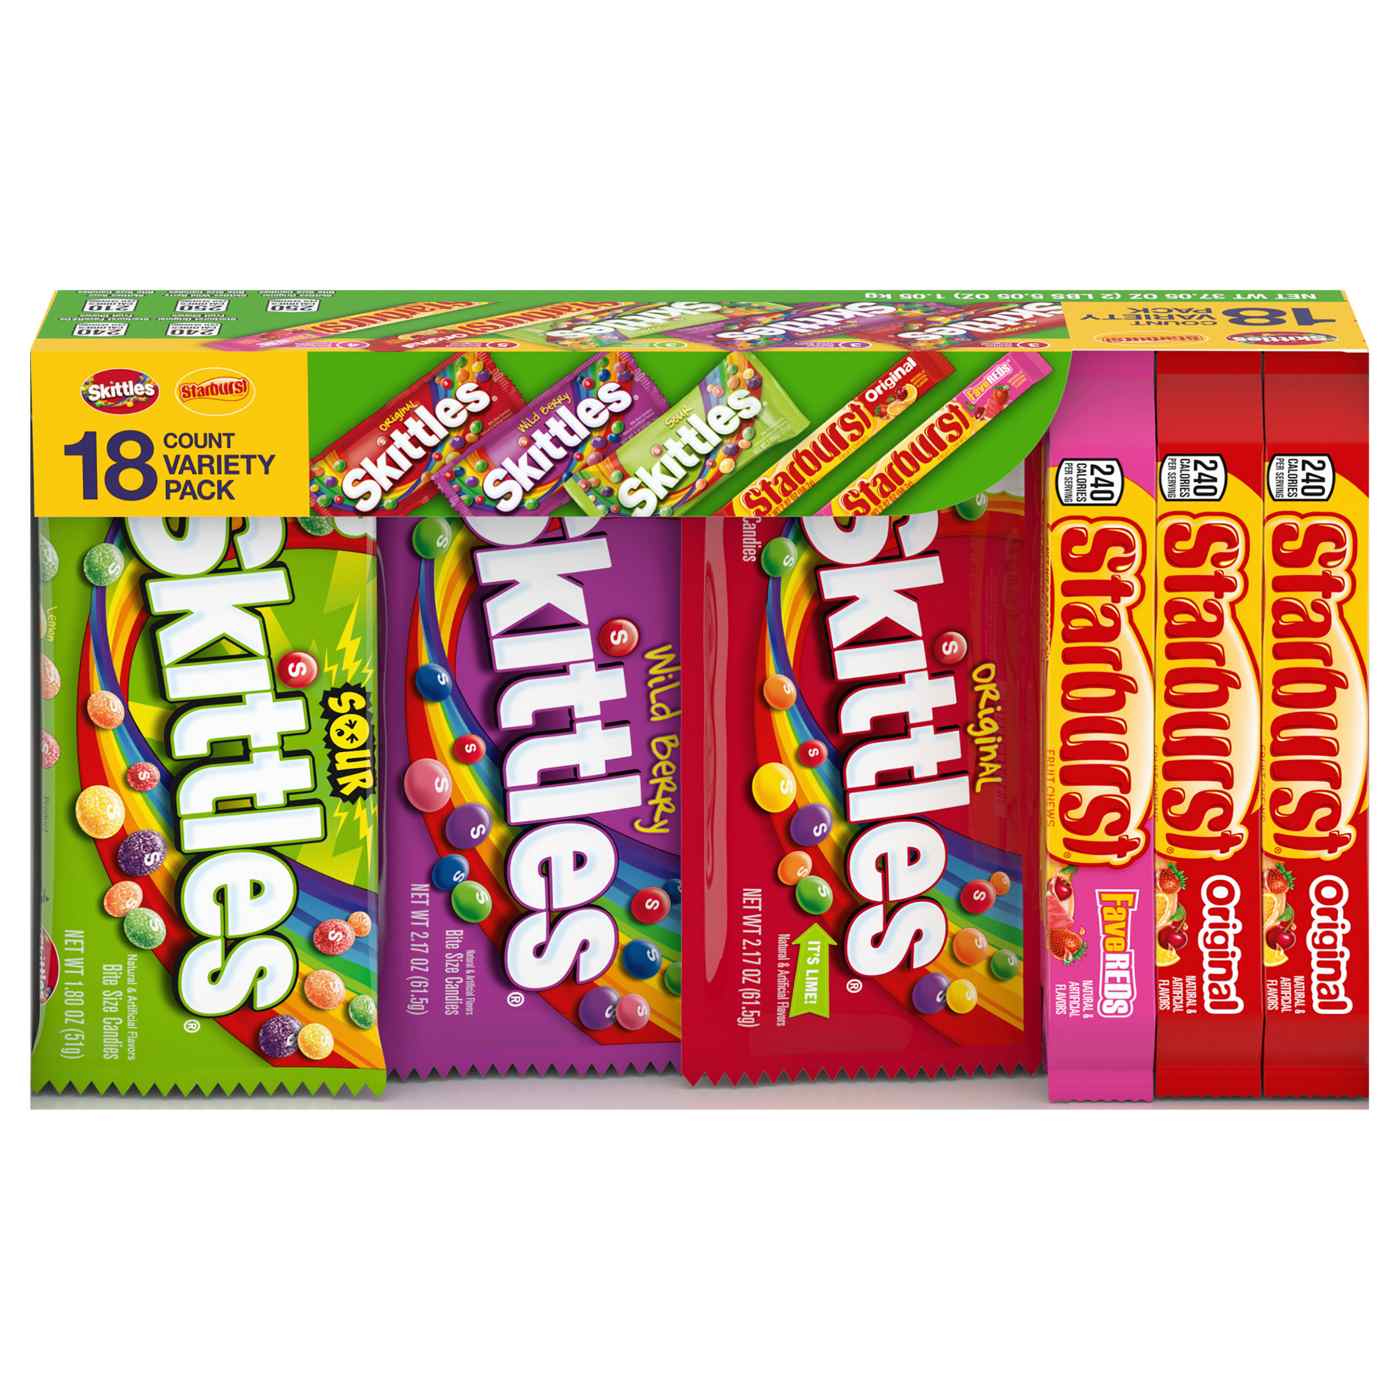 Skittles & Starburst Assorted Chewy Candy - Variety Pack; image 1 of 12